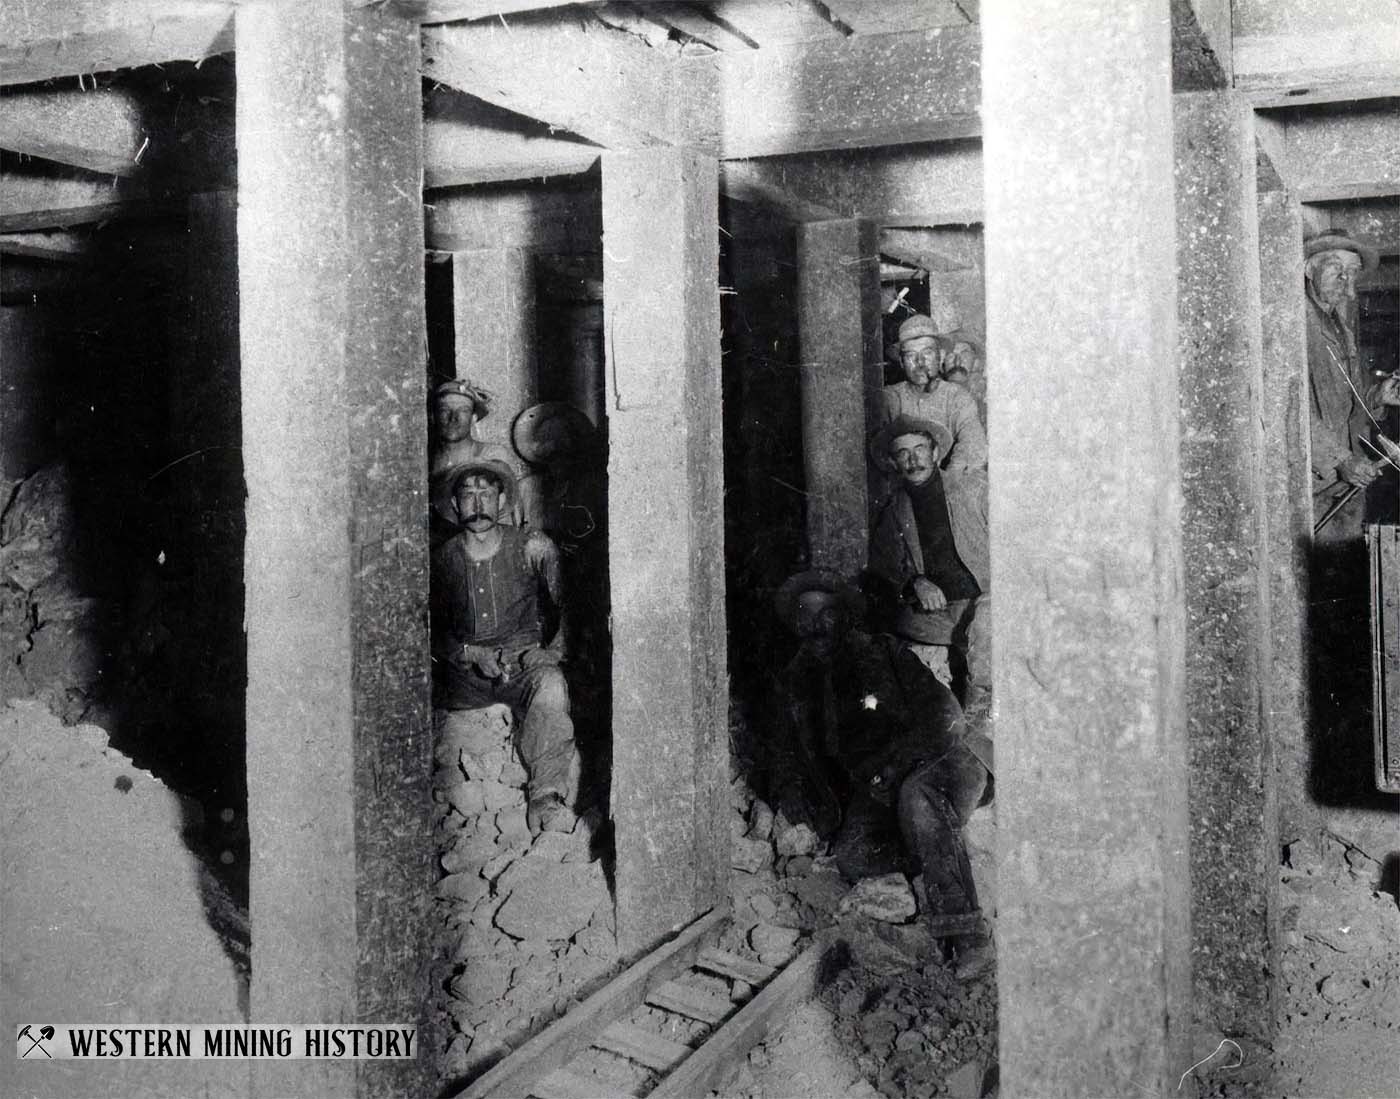 Square set timbering and miners in the Mohawk Mine